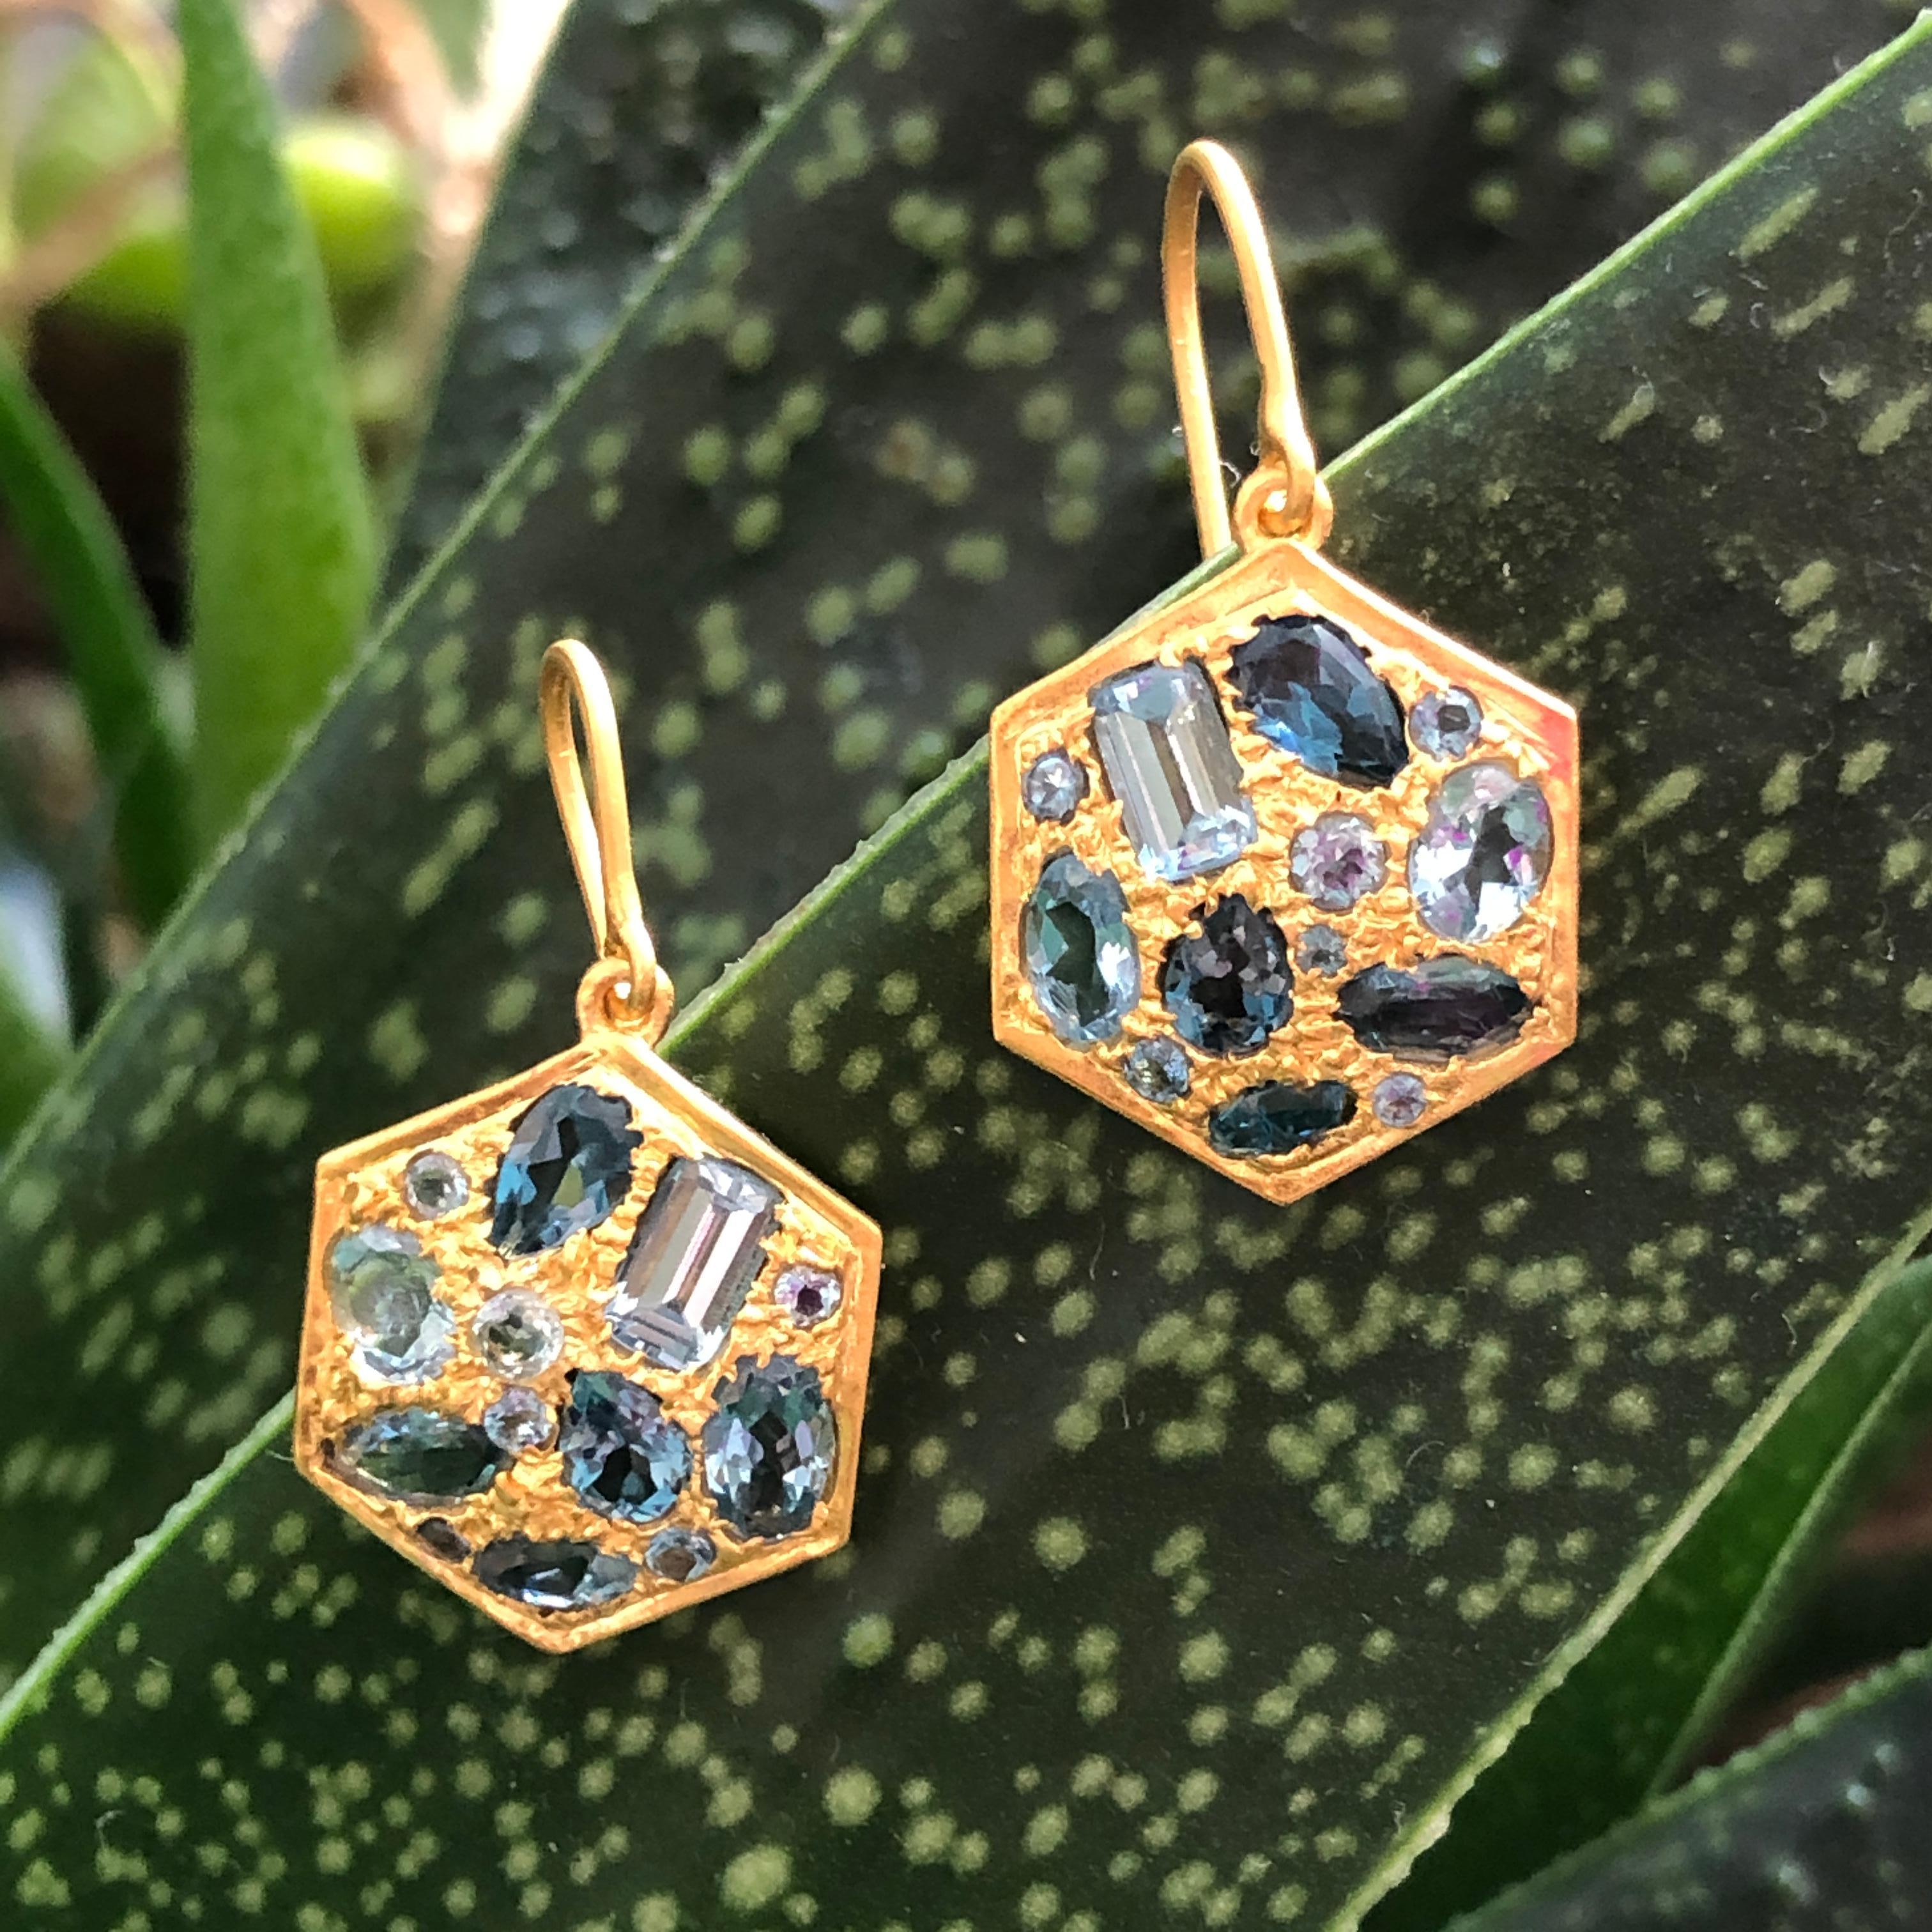 Designed by award winning Jewelry Designer, Lauren Harper, these 18kt Solid Gold hand made earrings feature faceted 2.91 cts of Aquamarine and London Blue Topaz set in an intricate grain setting.  Lightweight enough for all day wear yet special